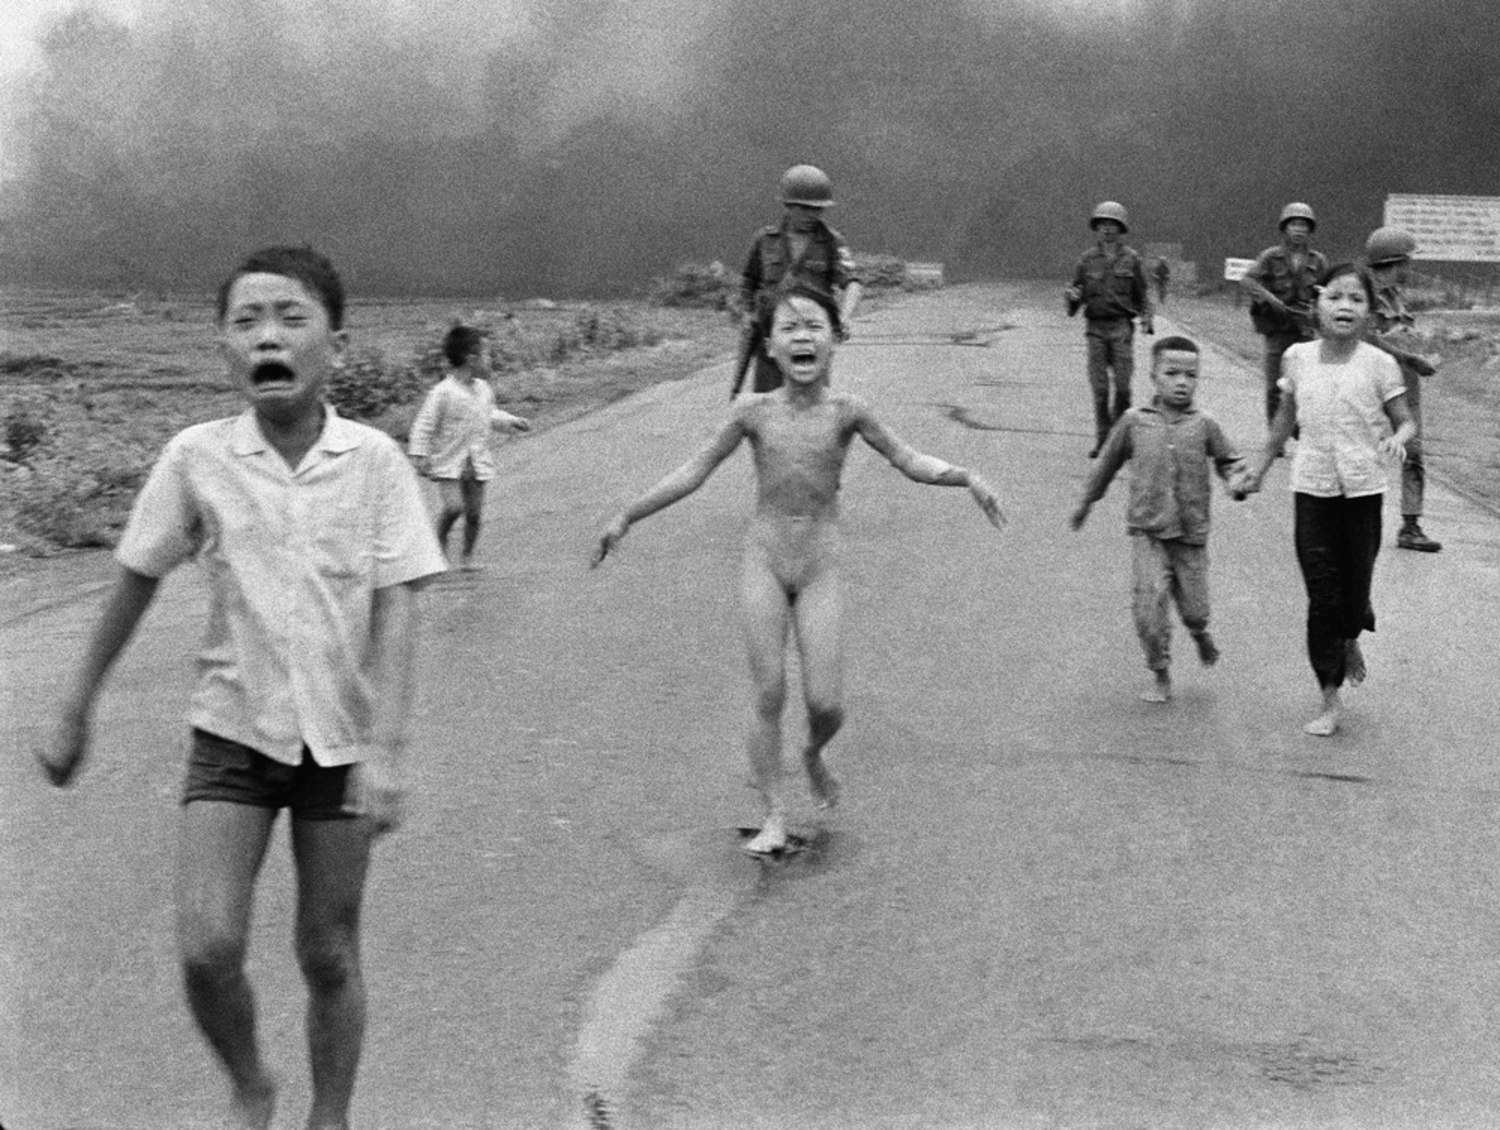 Indian Village Girl Bathing Nude - Vietnam's 'napalm girl' comes to terms with iconic photo